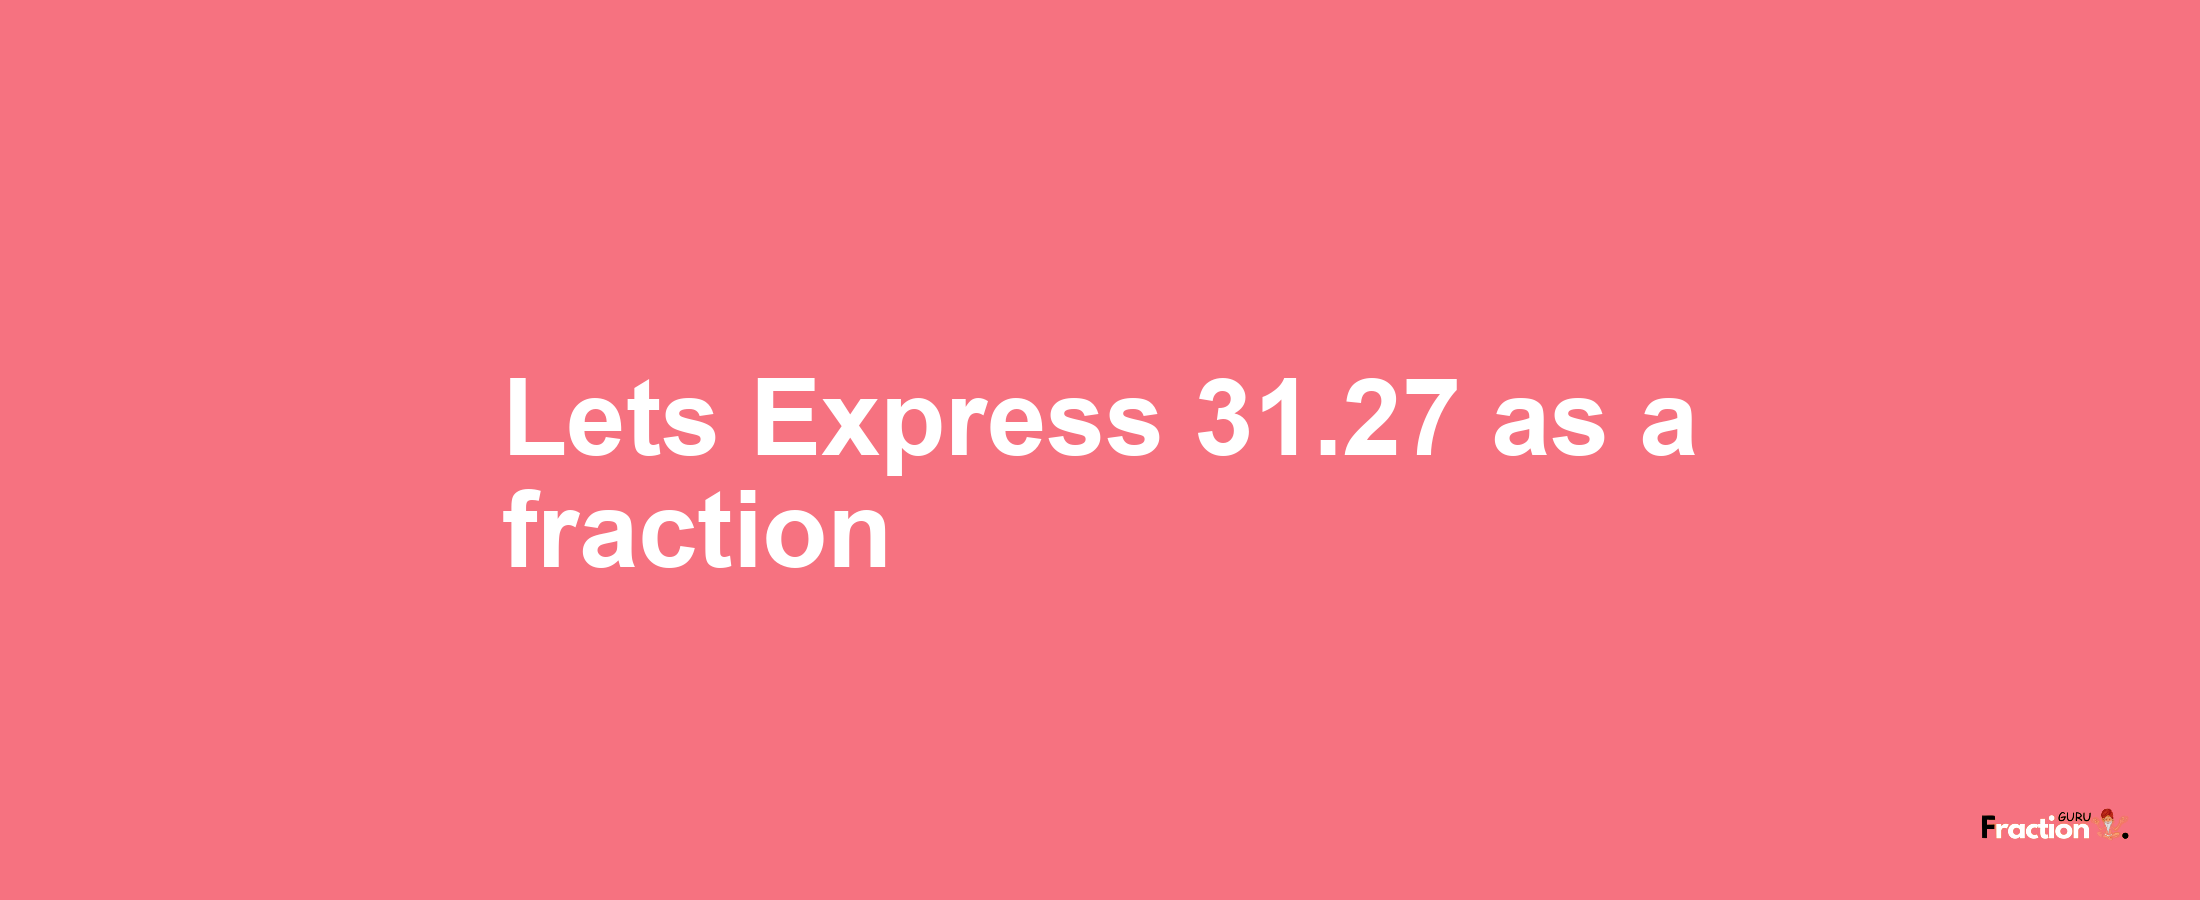 Lets Express 31.27 as afraction